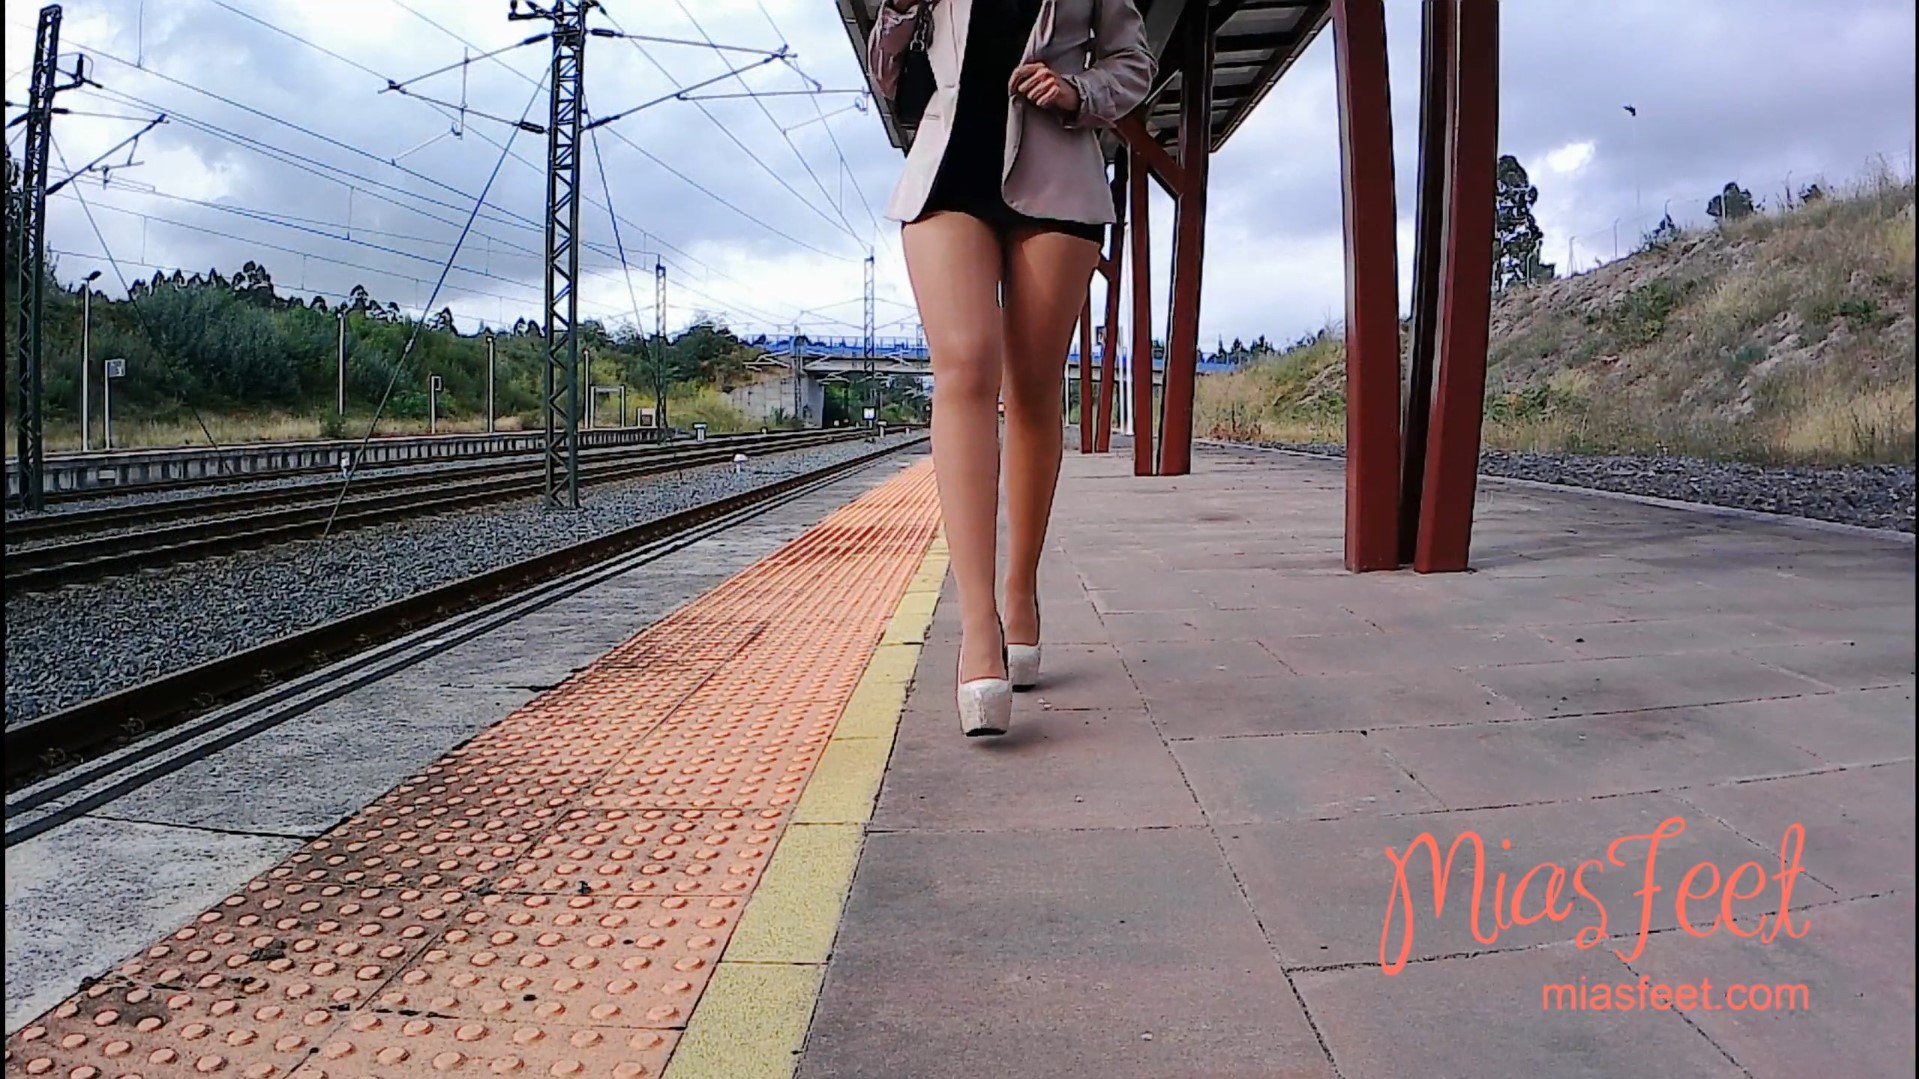 Walking around with high heels and pantyhose